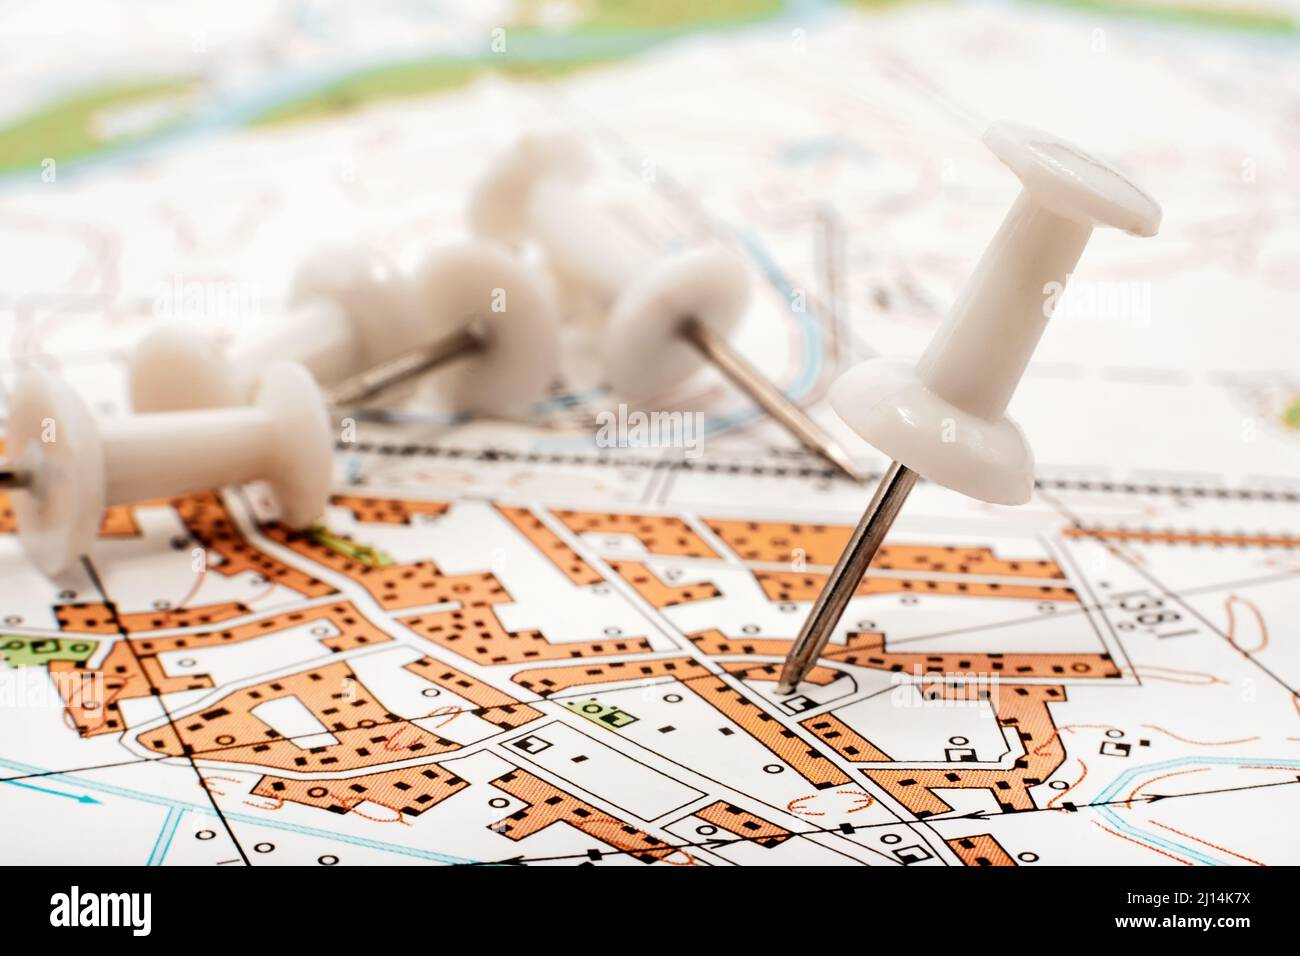 A paper clip on the map shows the end point of the route. Travel guide. Map of the city, area Stock Photo